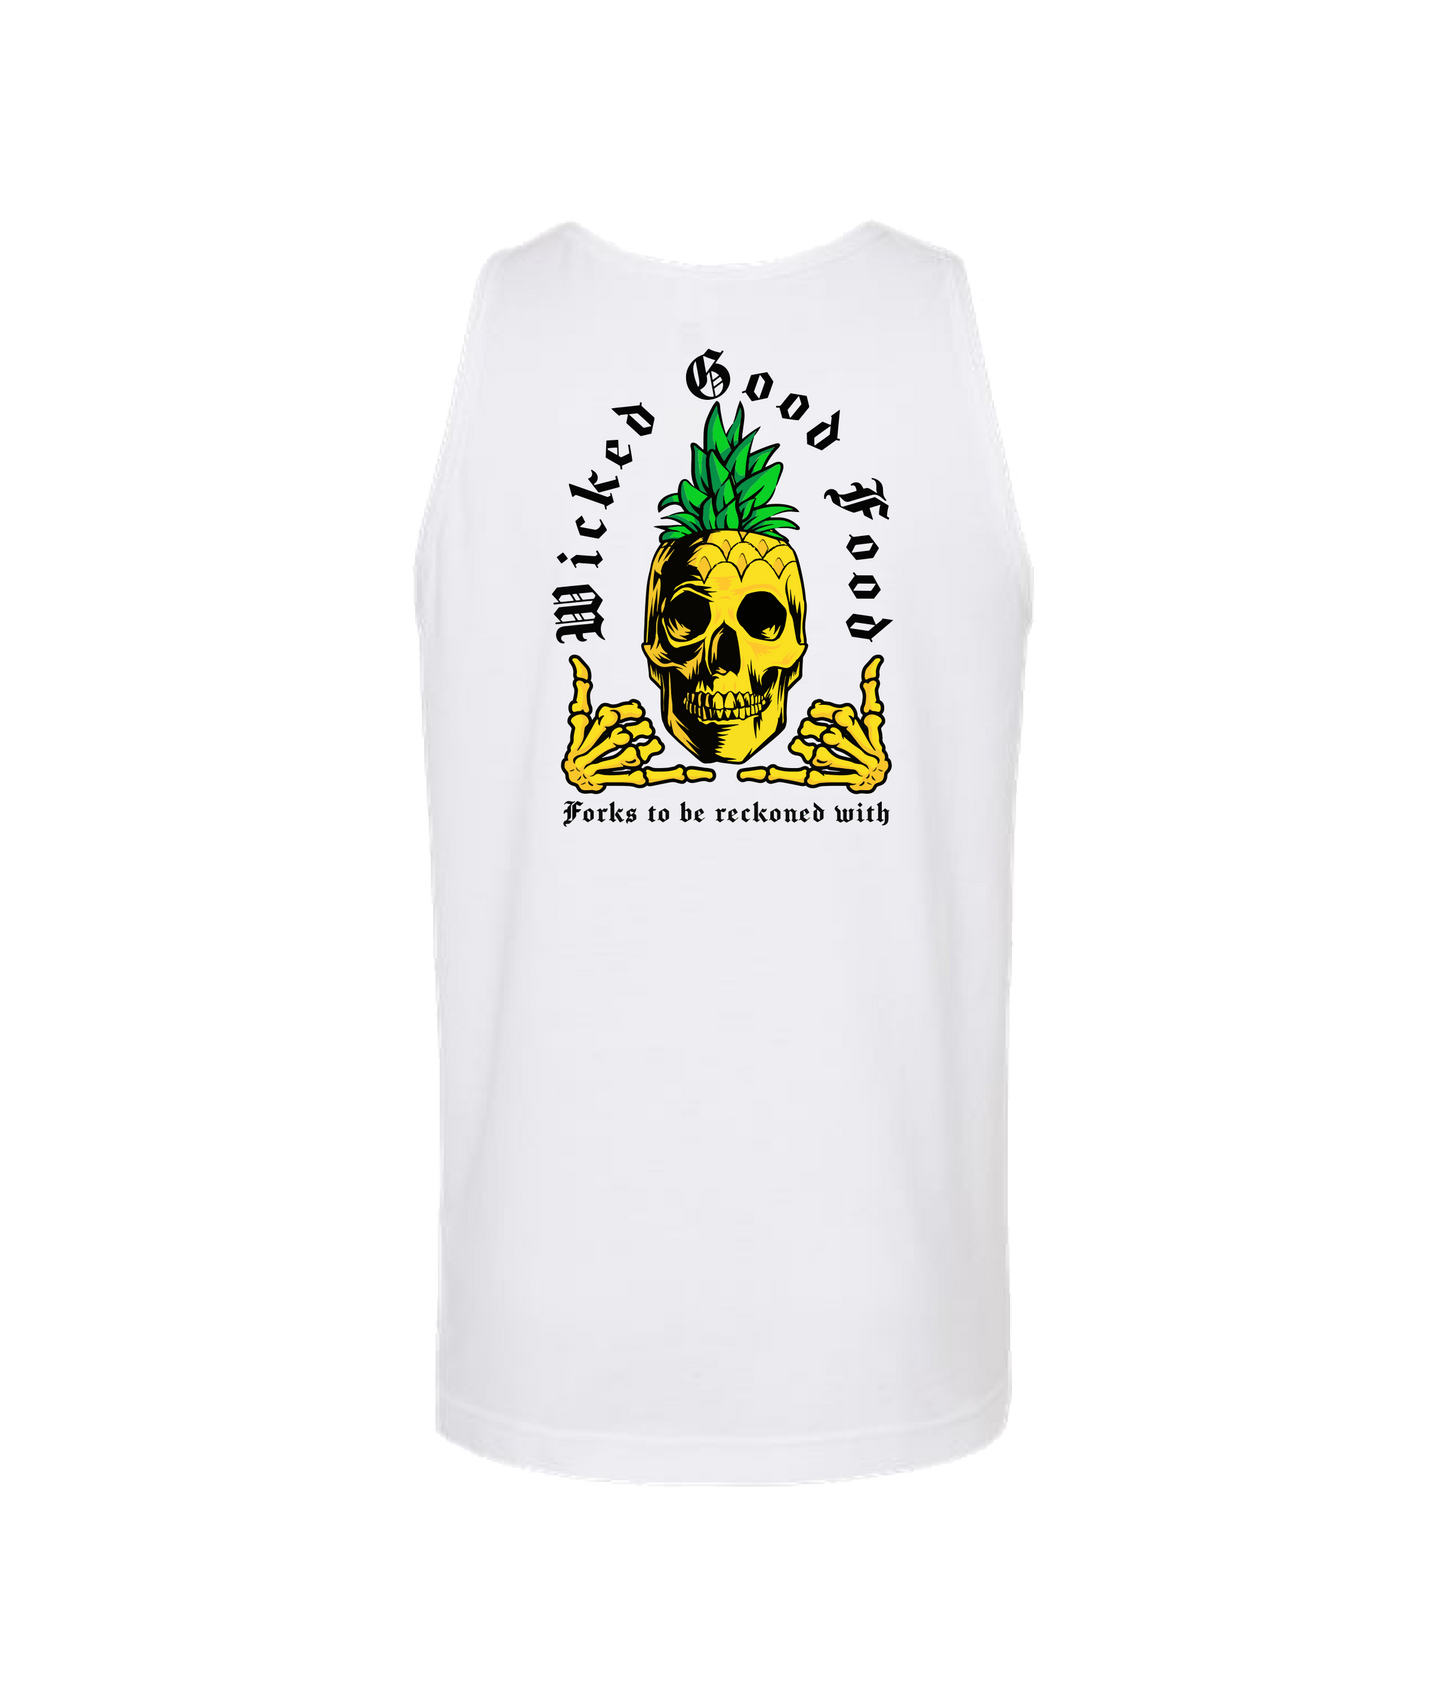 The Wicked Kitchen - 2 Sided Forks - White Tank Top